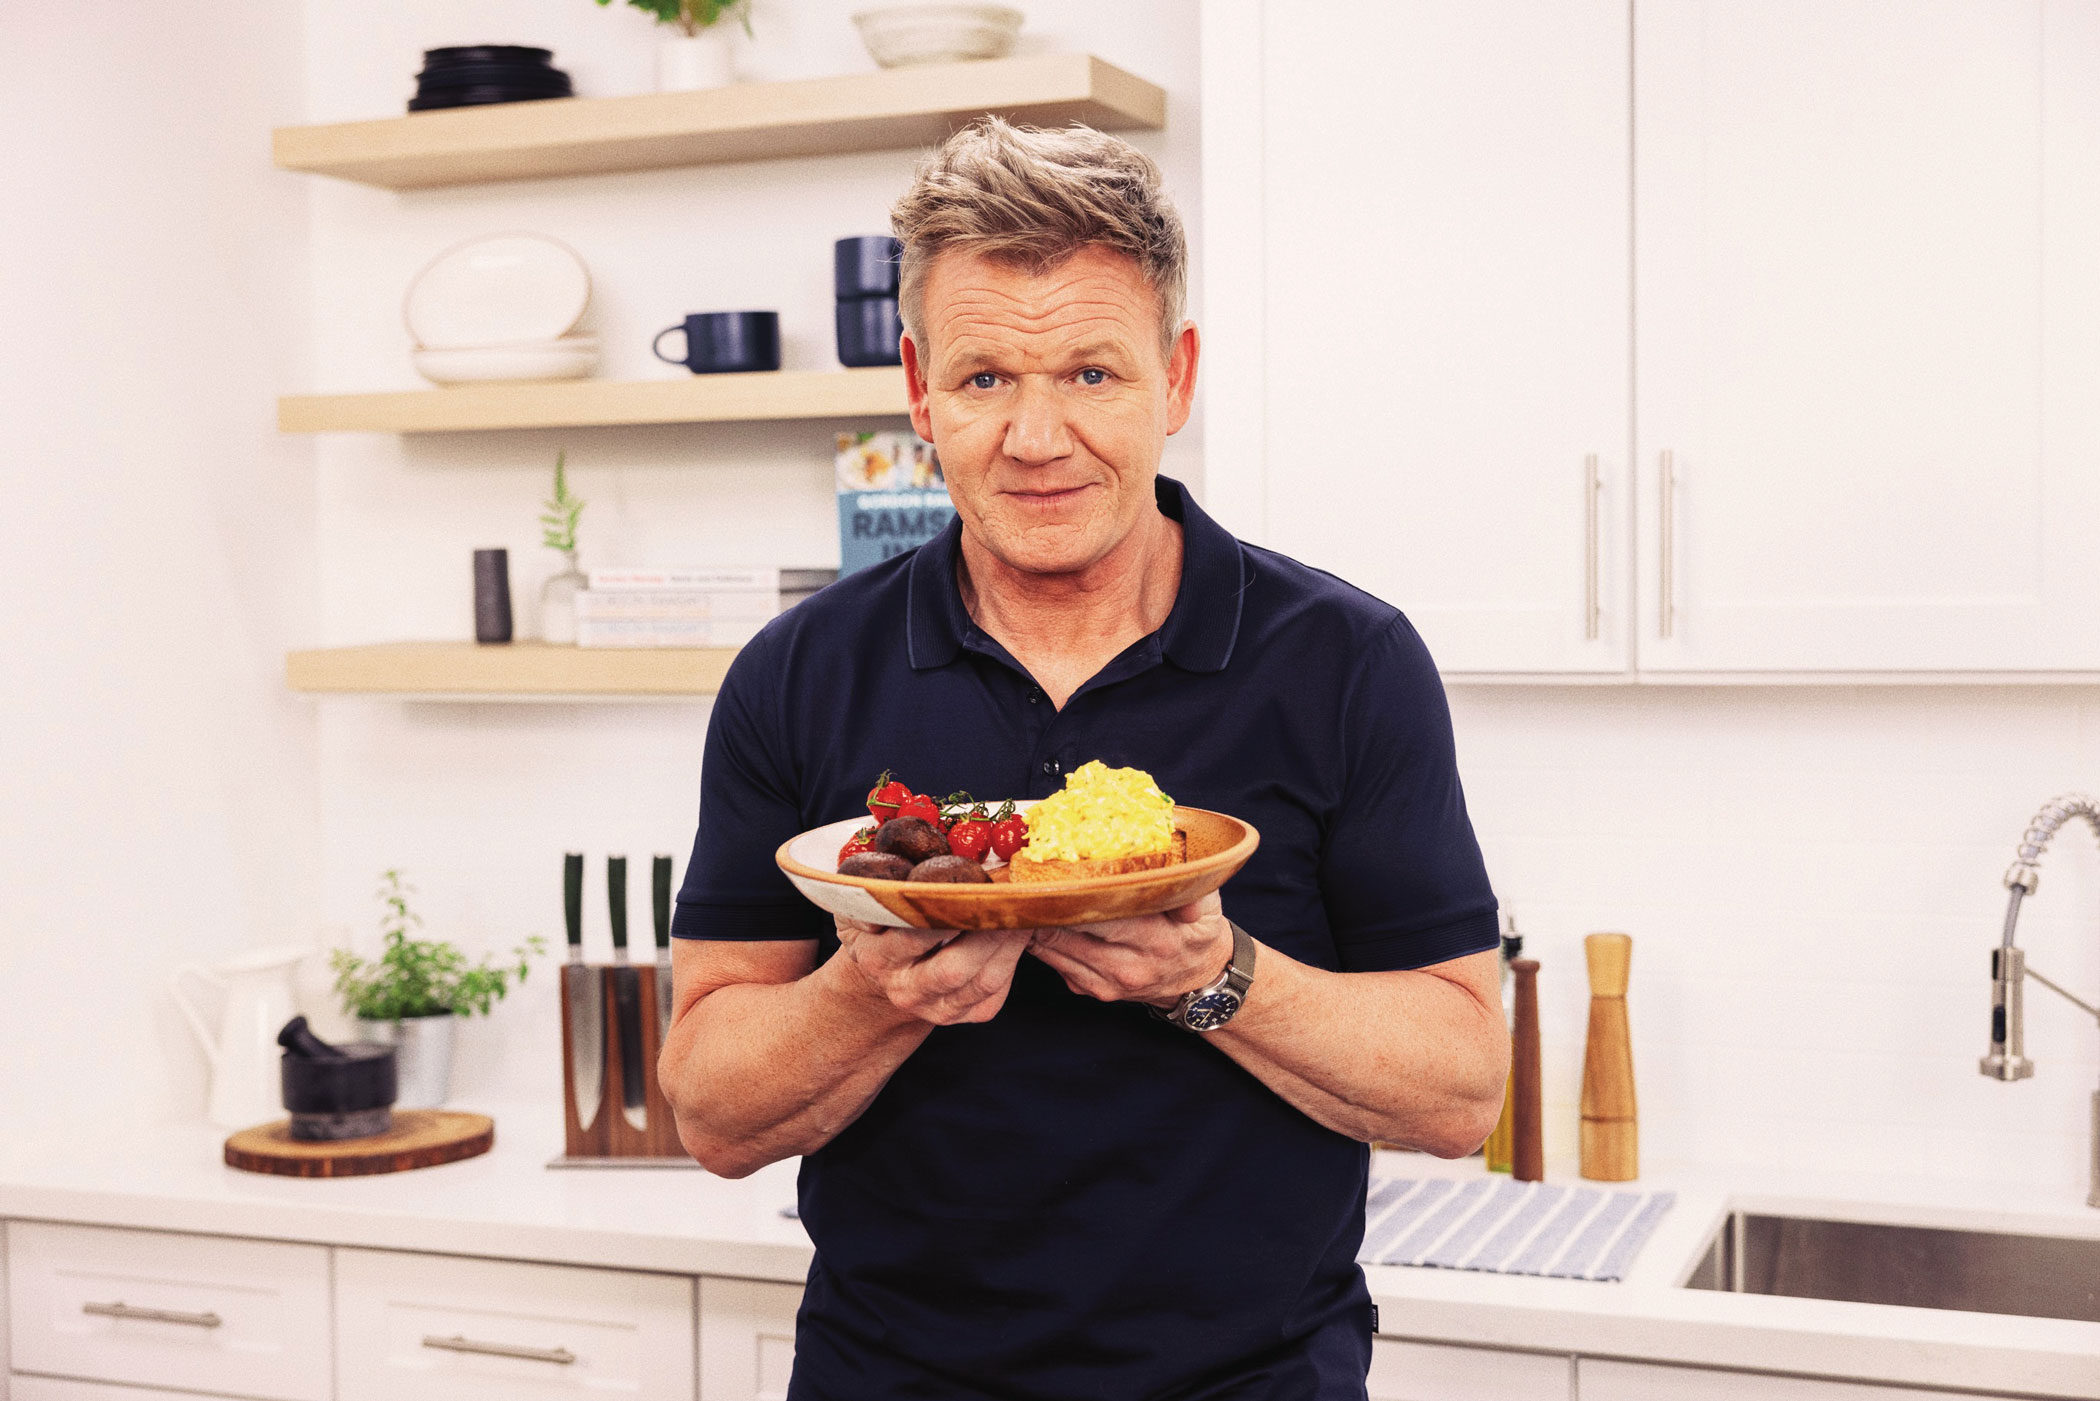 A chat over breakfast with Chef Gordon Ramsay